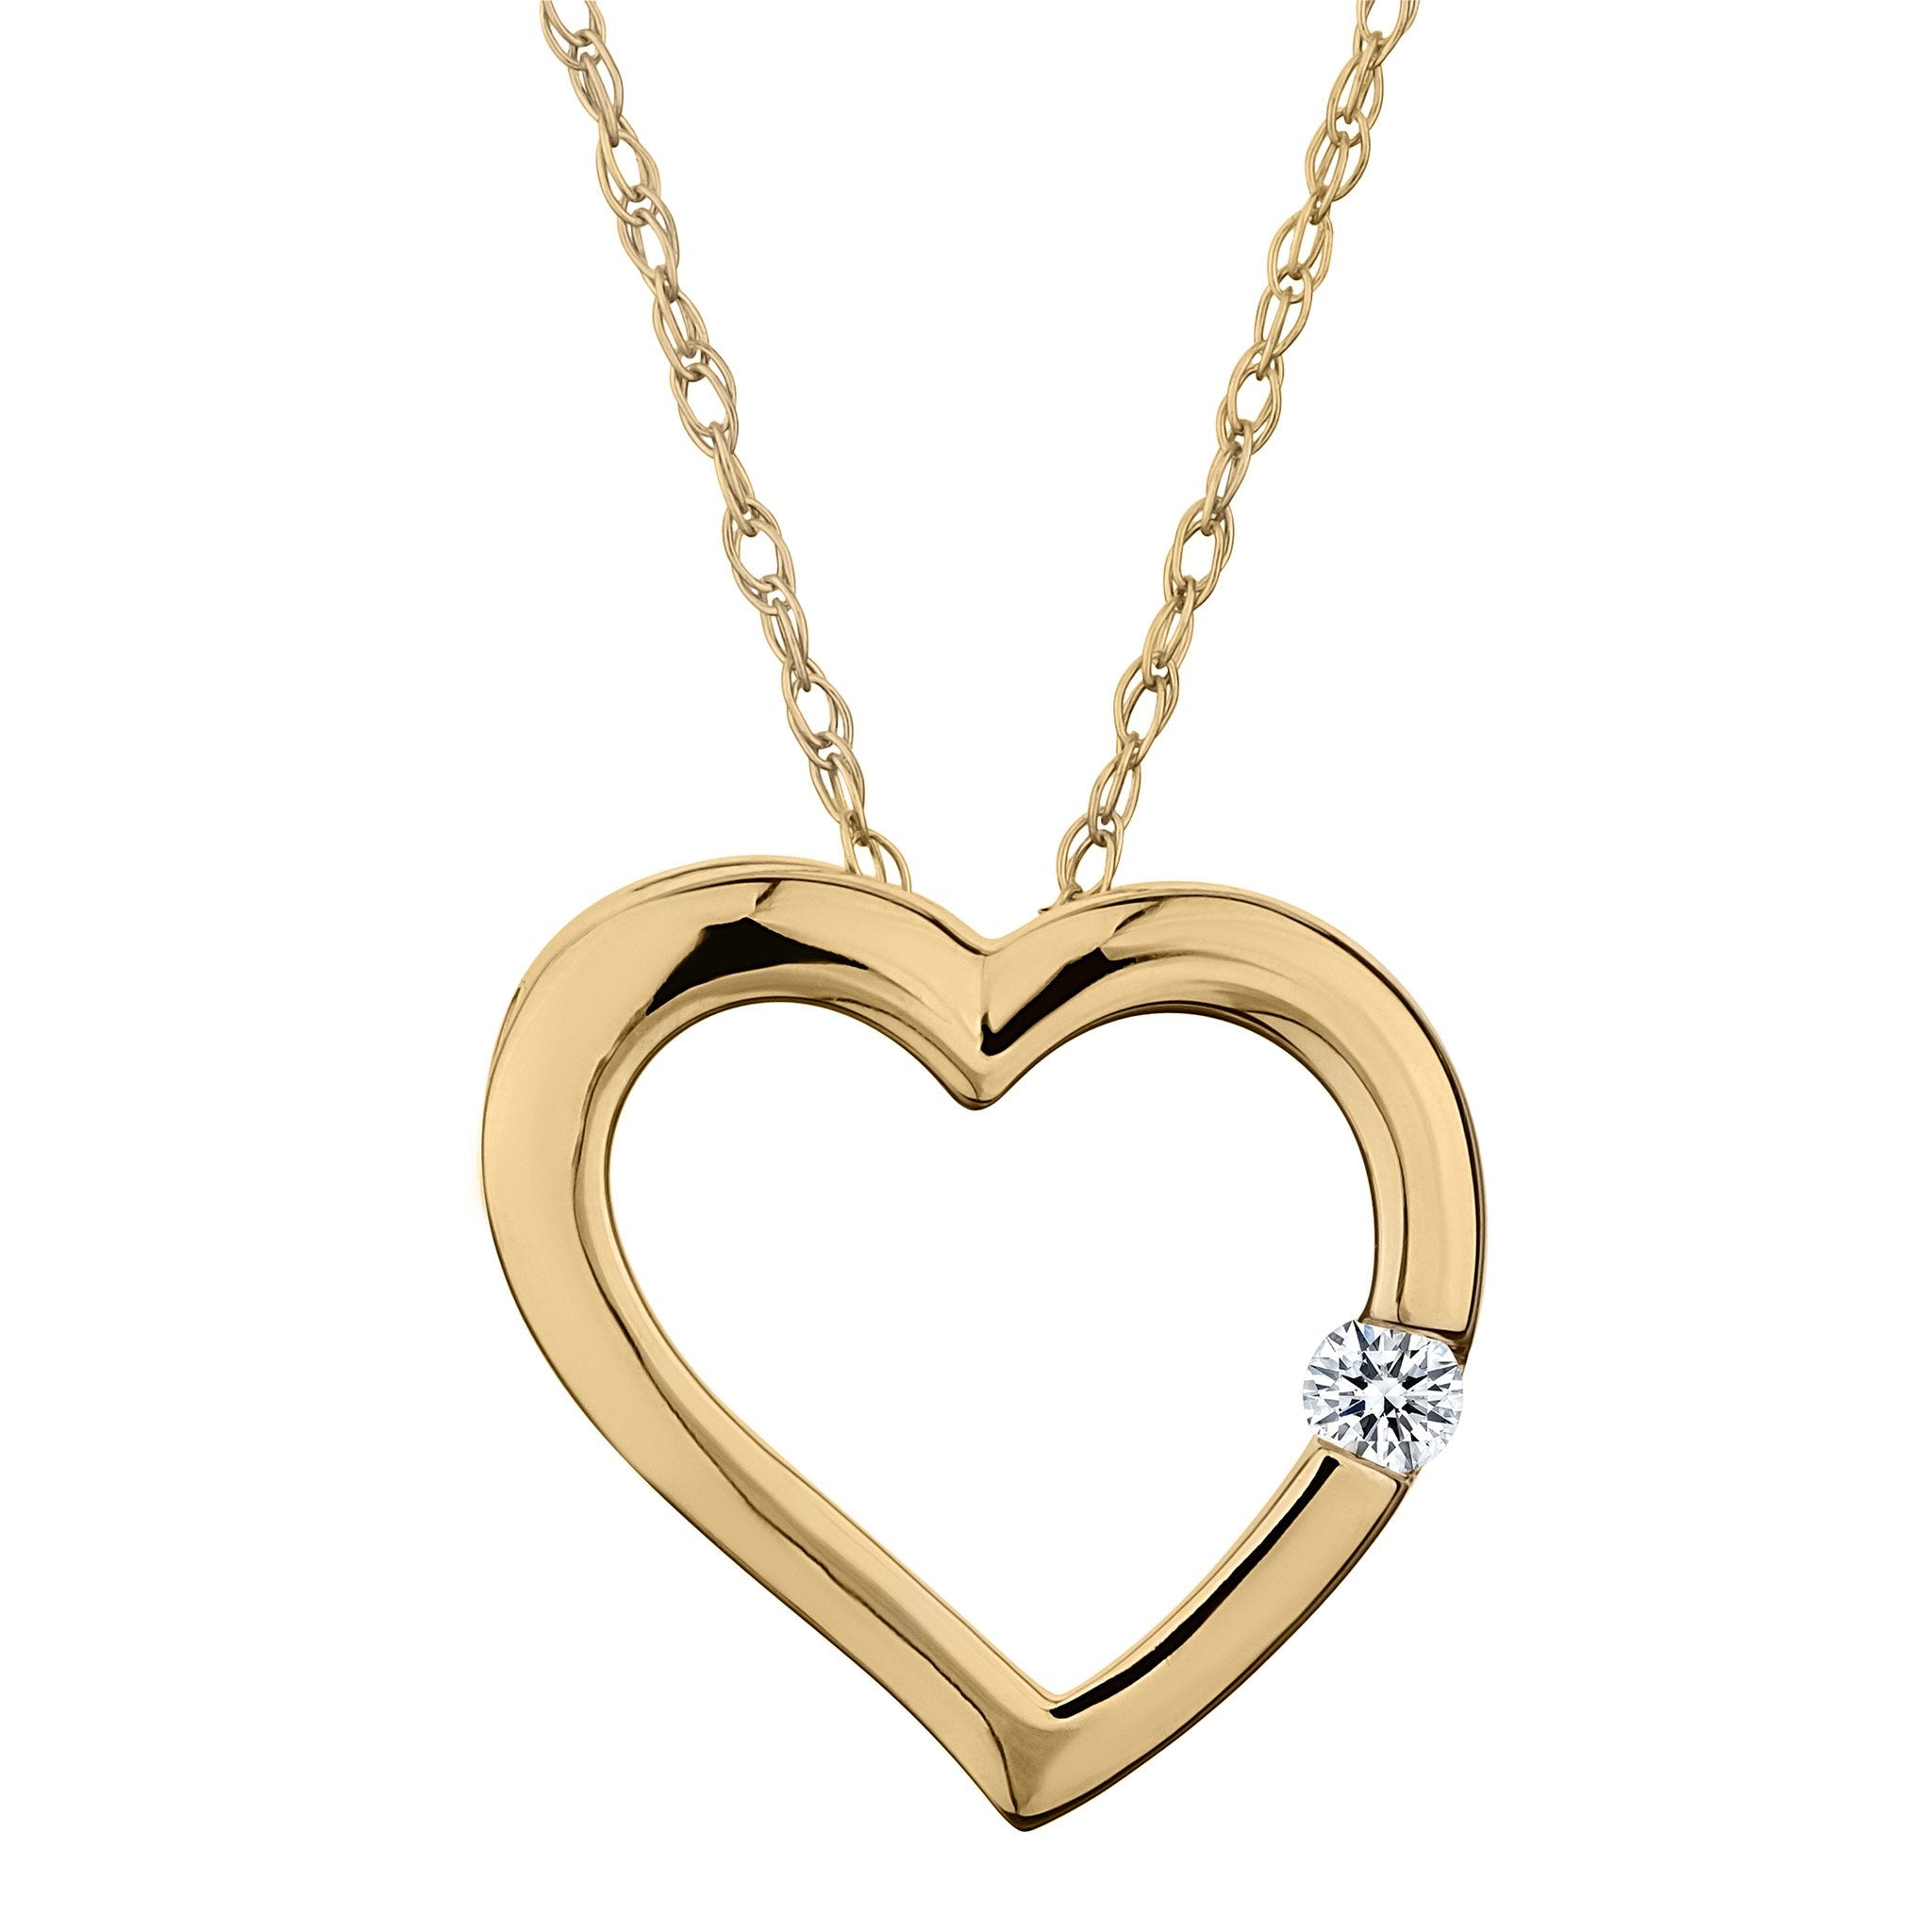 6Y4500 Pendant Heart 8x2x10 cm Gold colored Metal Heart-Shaped